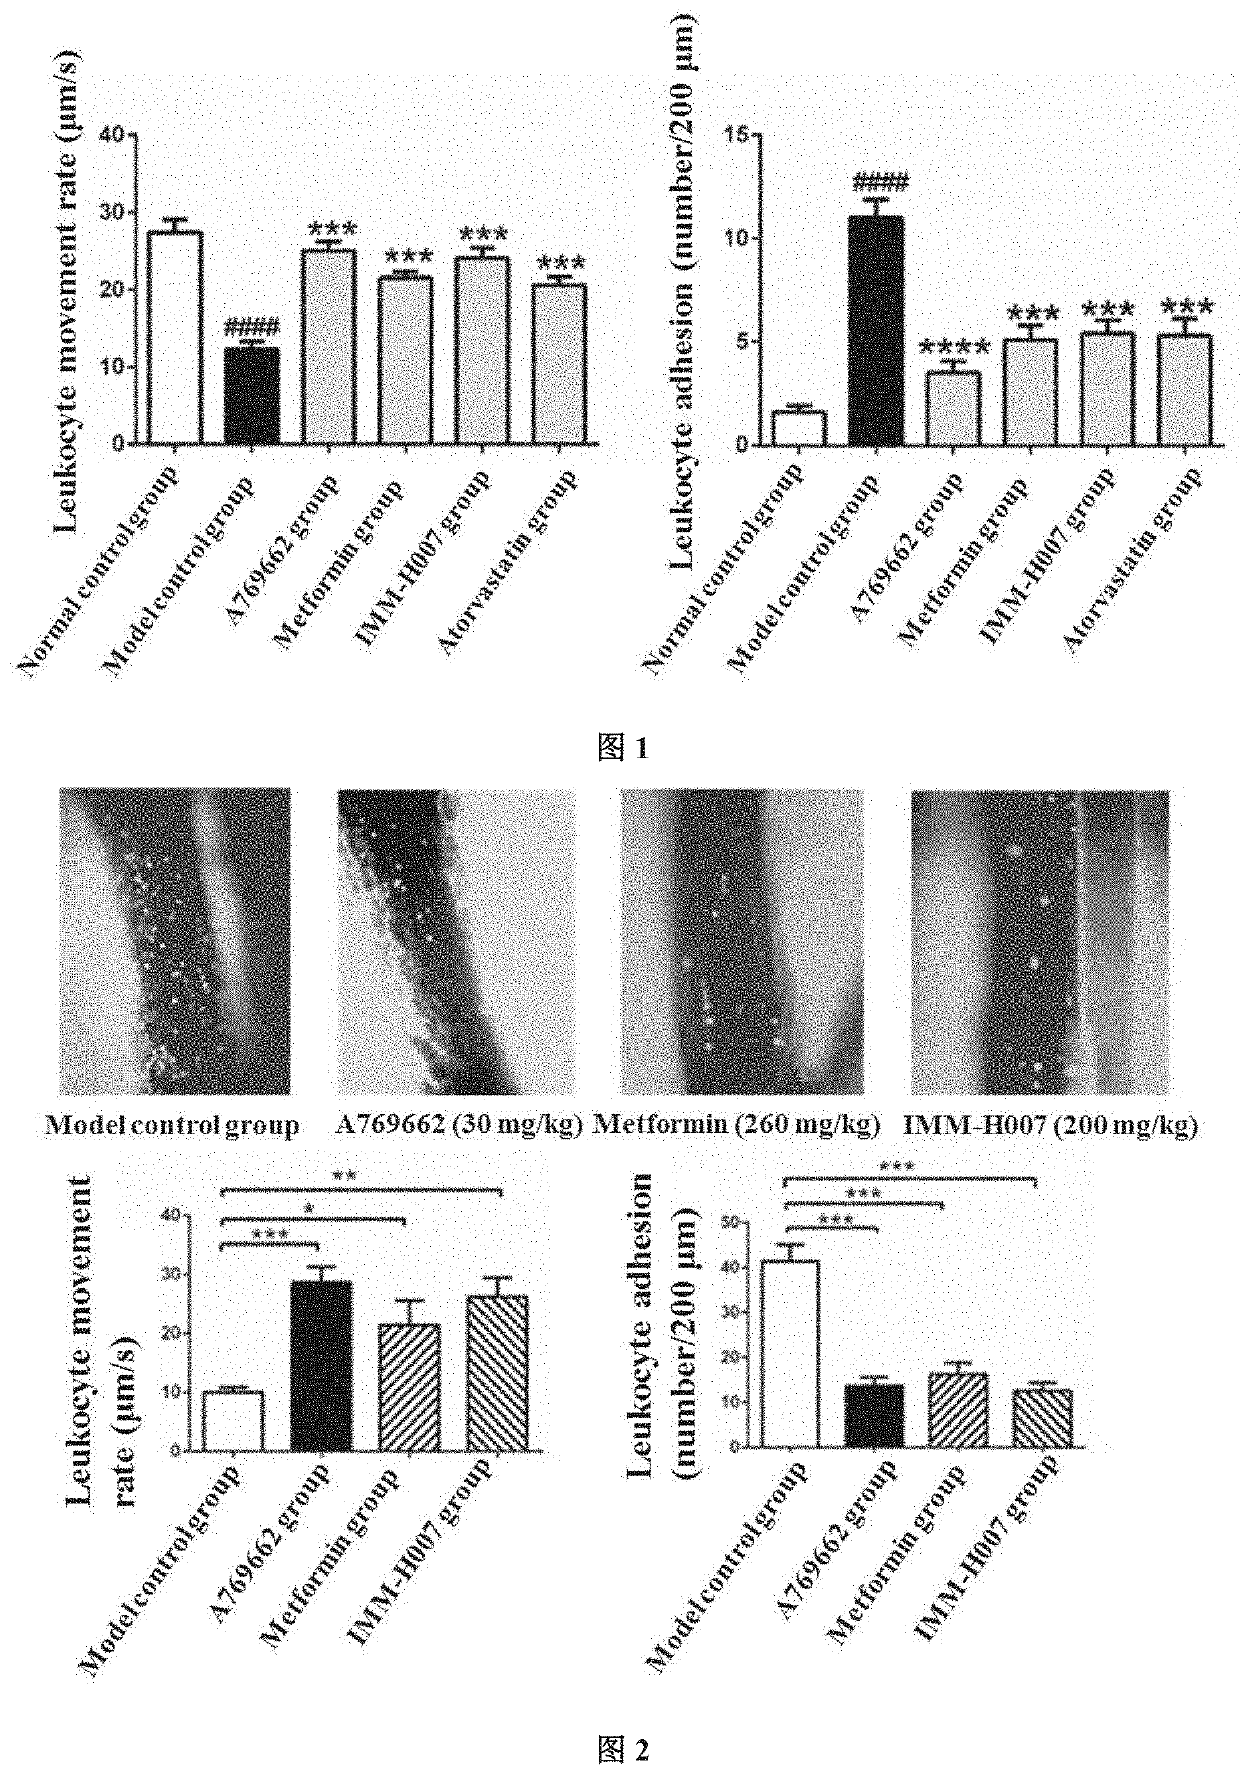 Applications of triacetyl-3-hydroxyl phenyl adenosine in treating vascular inflammations or improving vascular endothelium functions